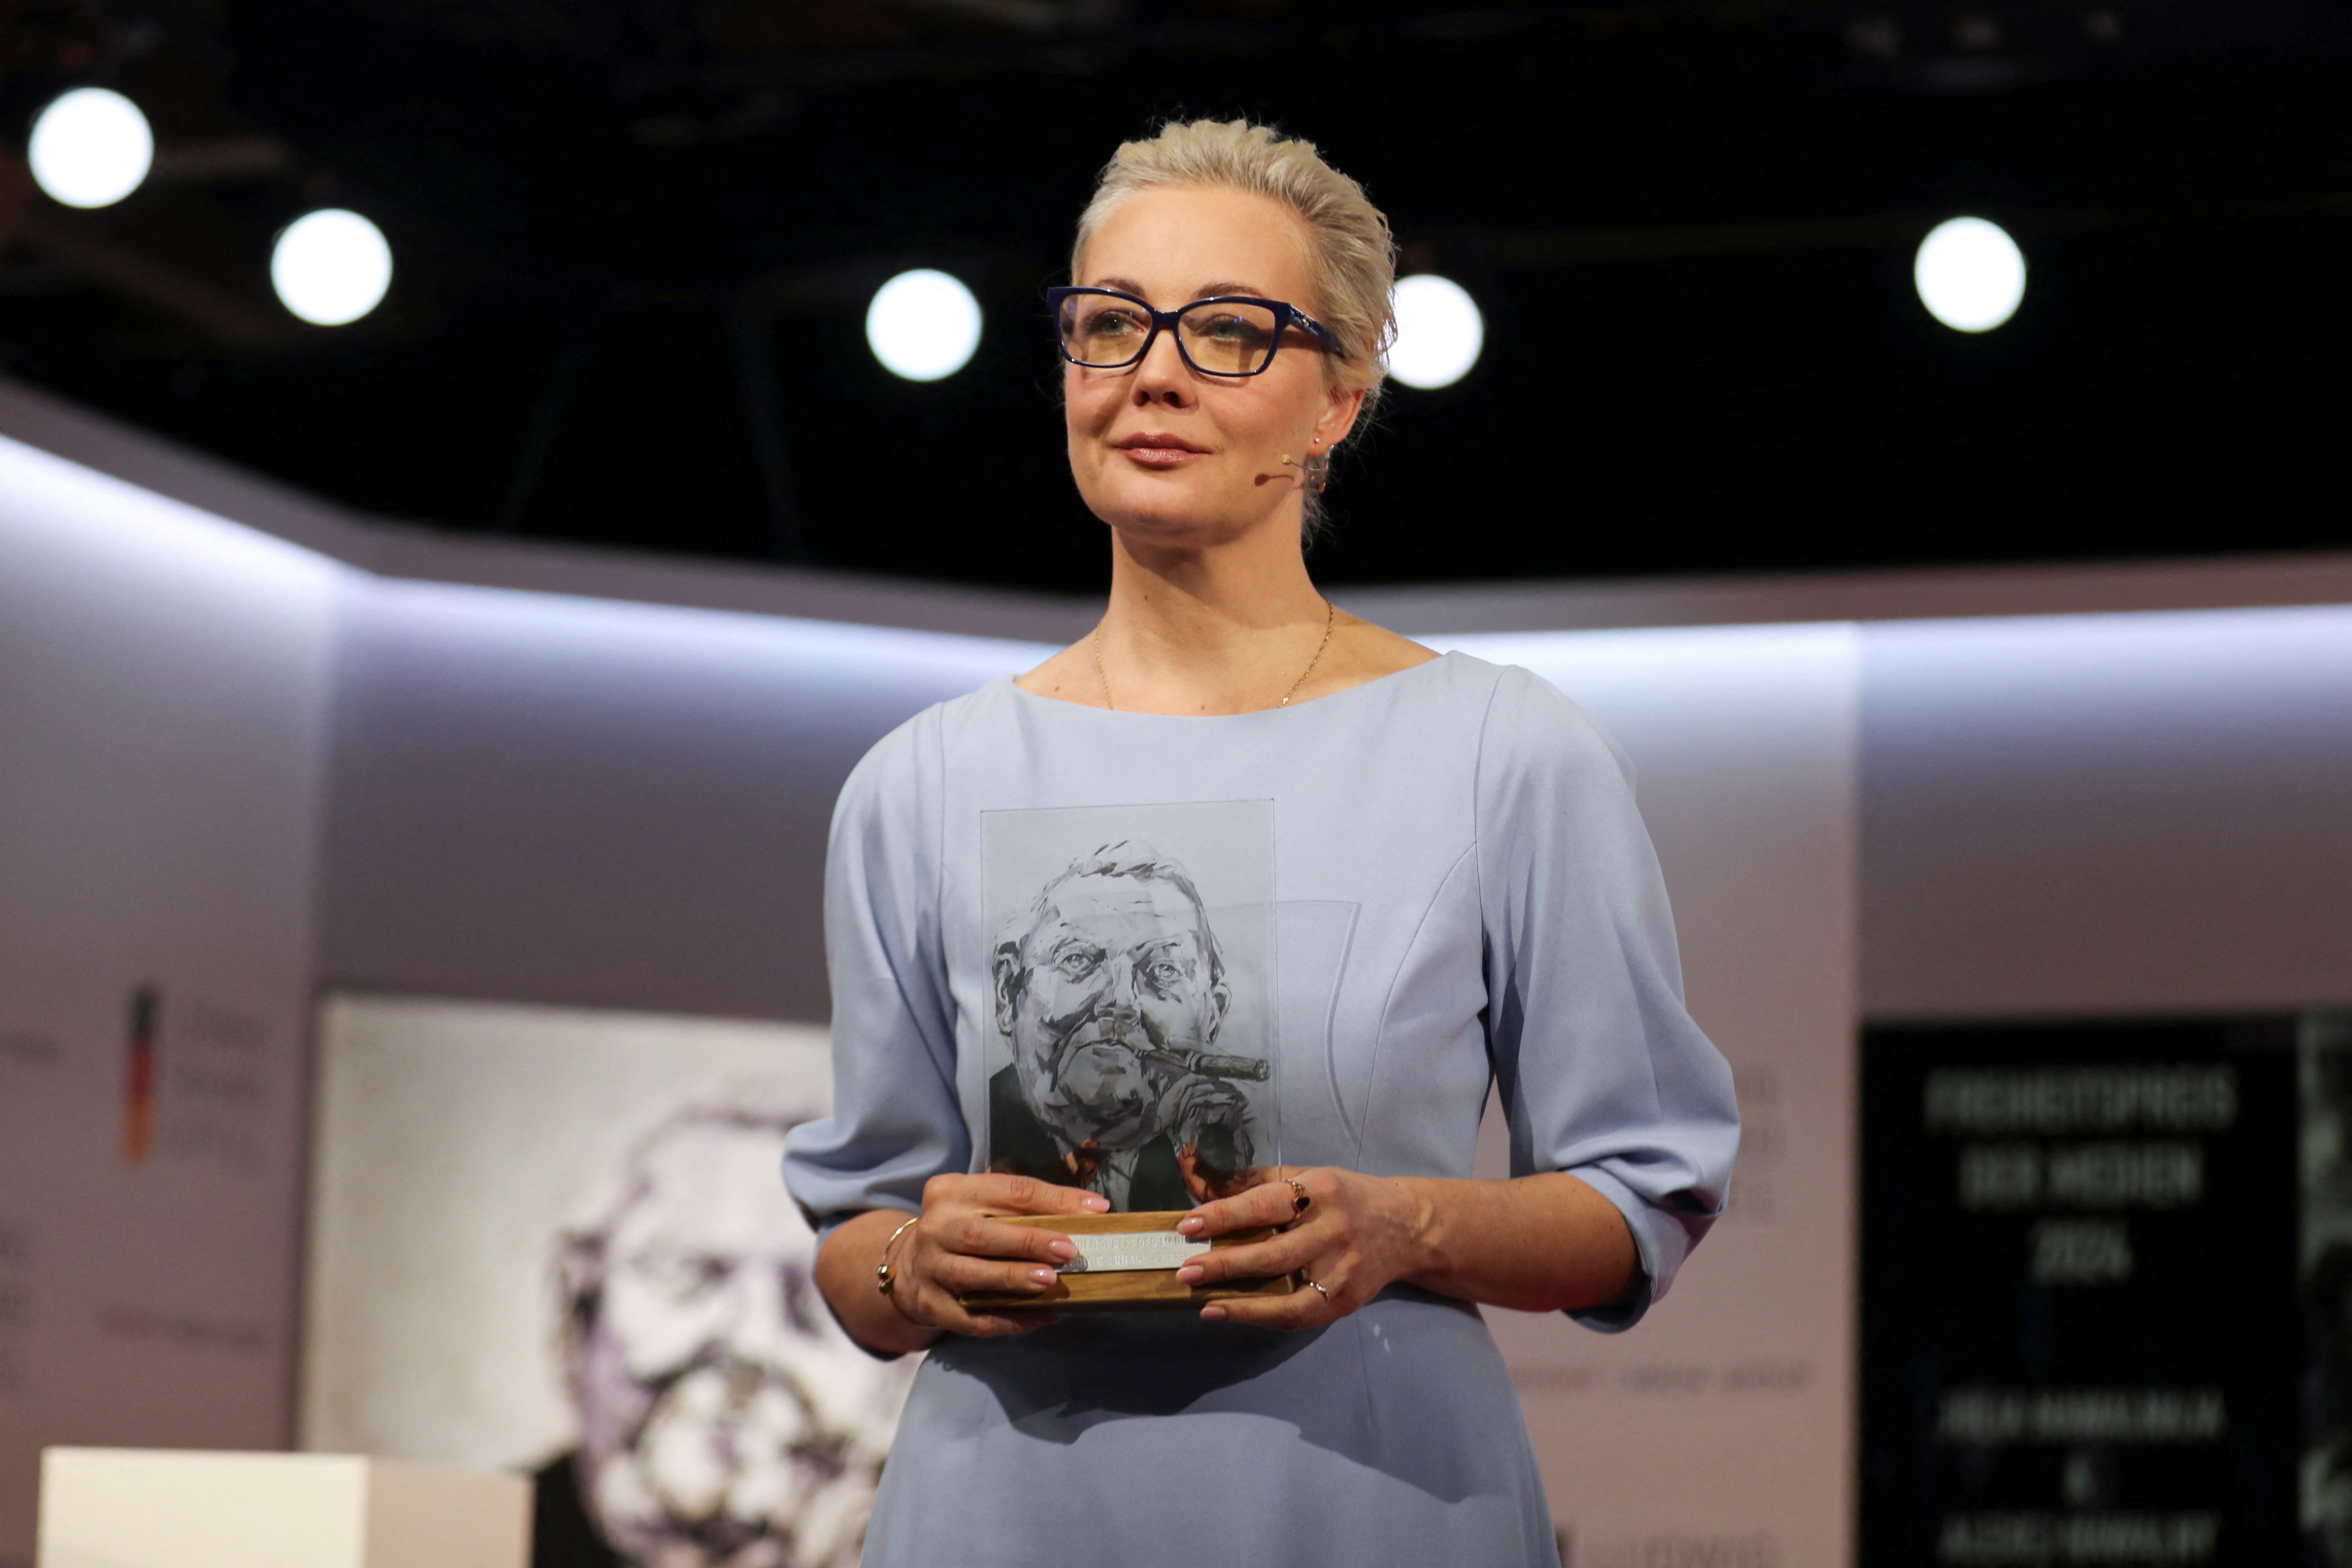 File photo: Yulia Navalnaya, the widow of late Russian opposition leader Alexei Navalny, poses with the ‘Media Freedom Prize’